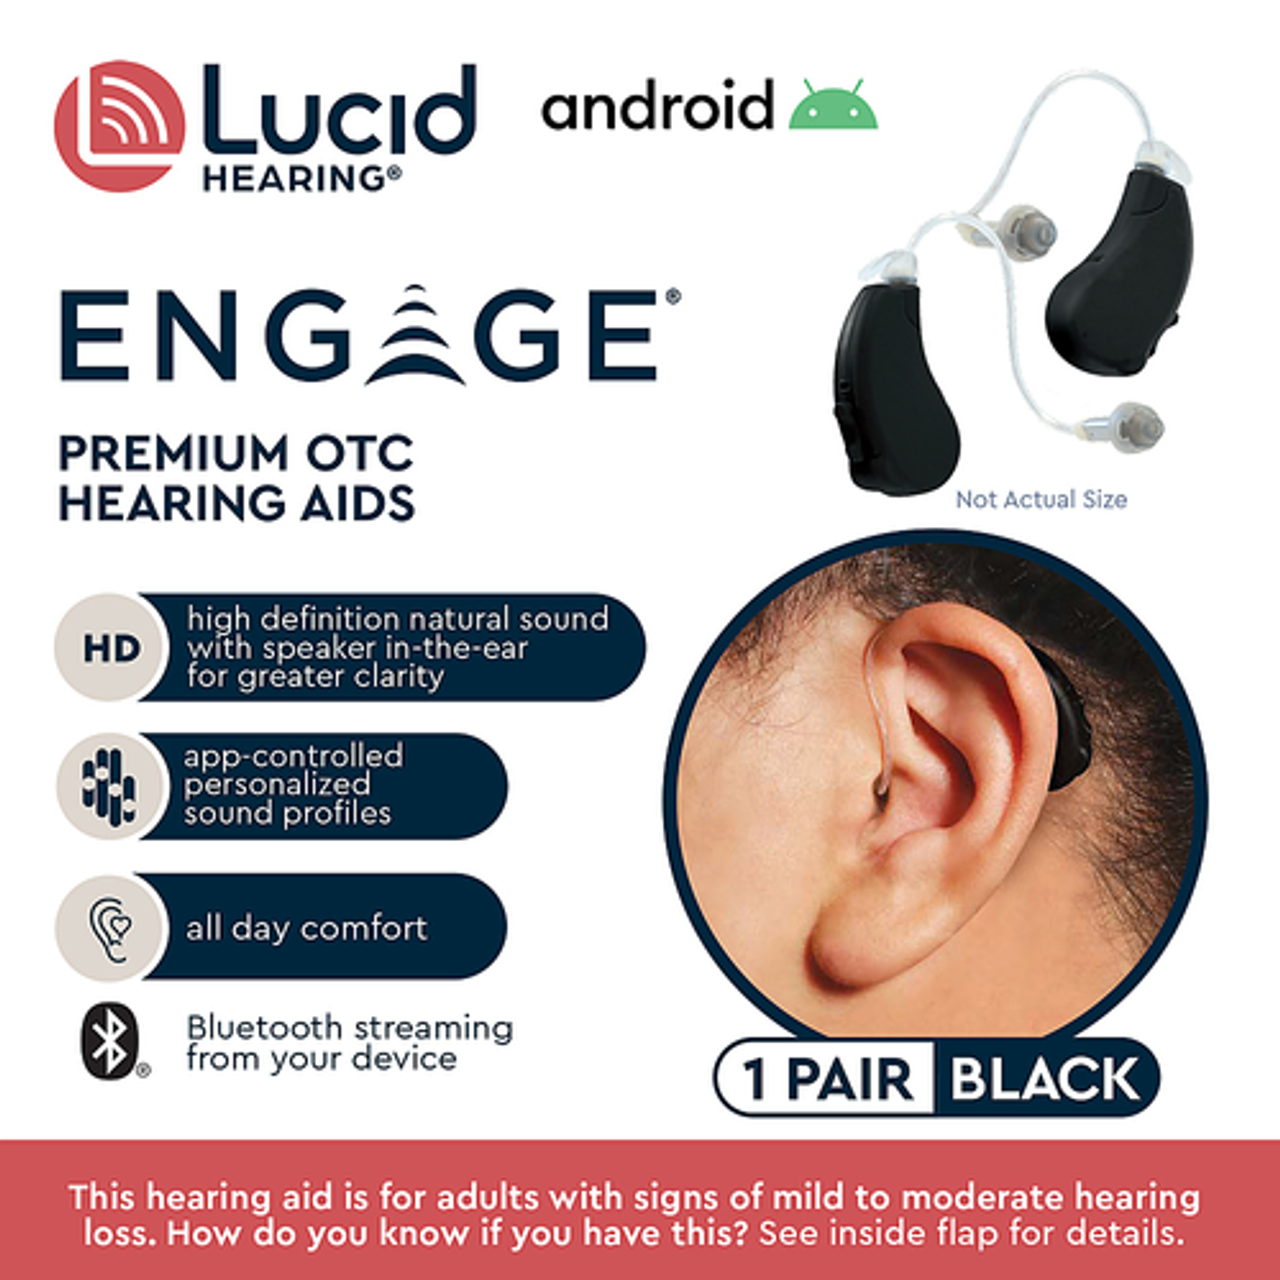 Lucid Hearing - OTC Engage Premium Hearing Aids Android - Black